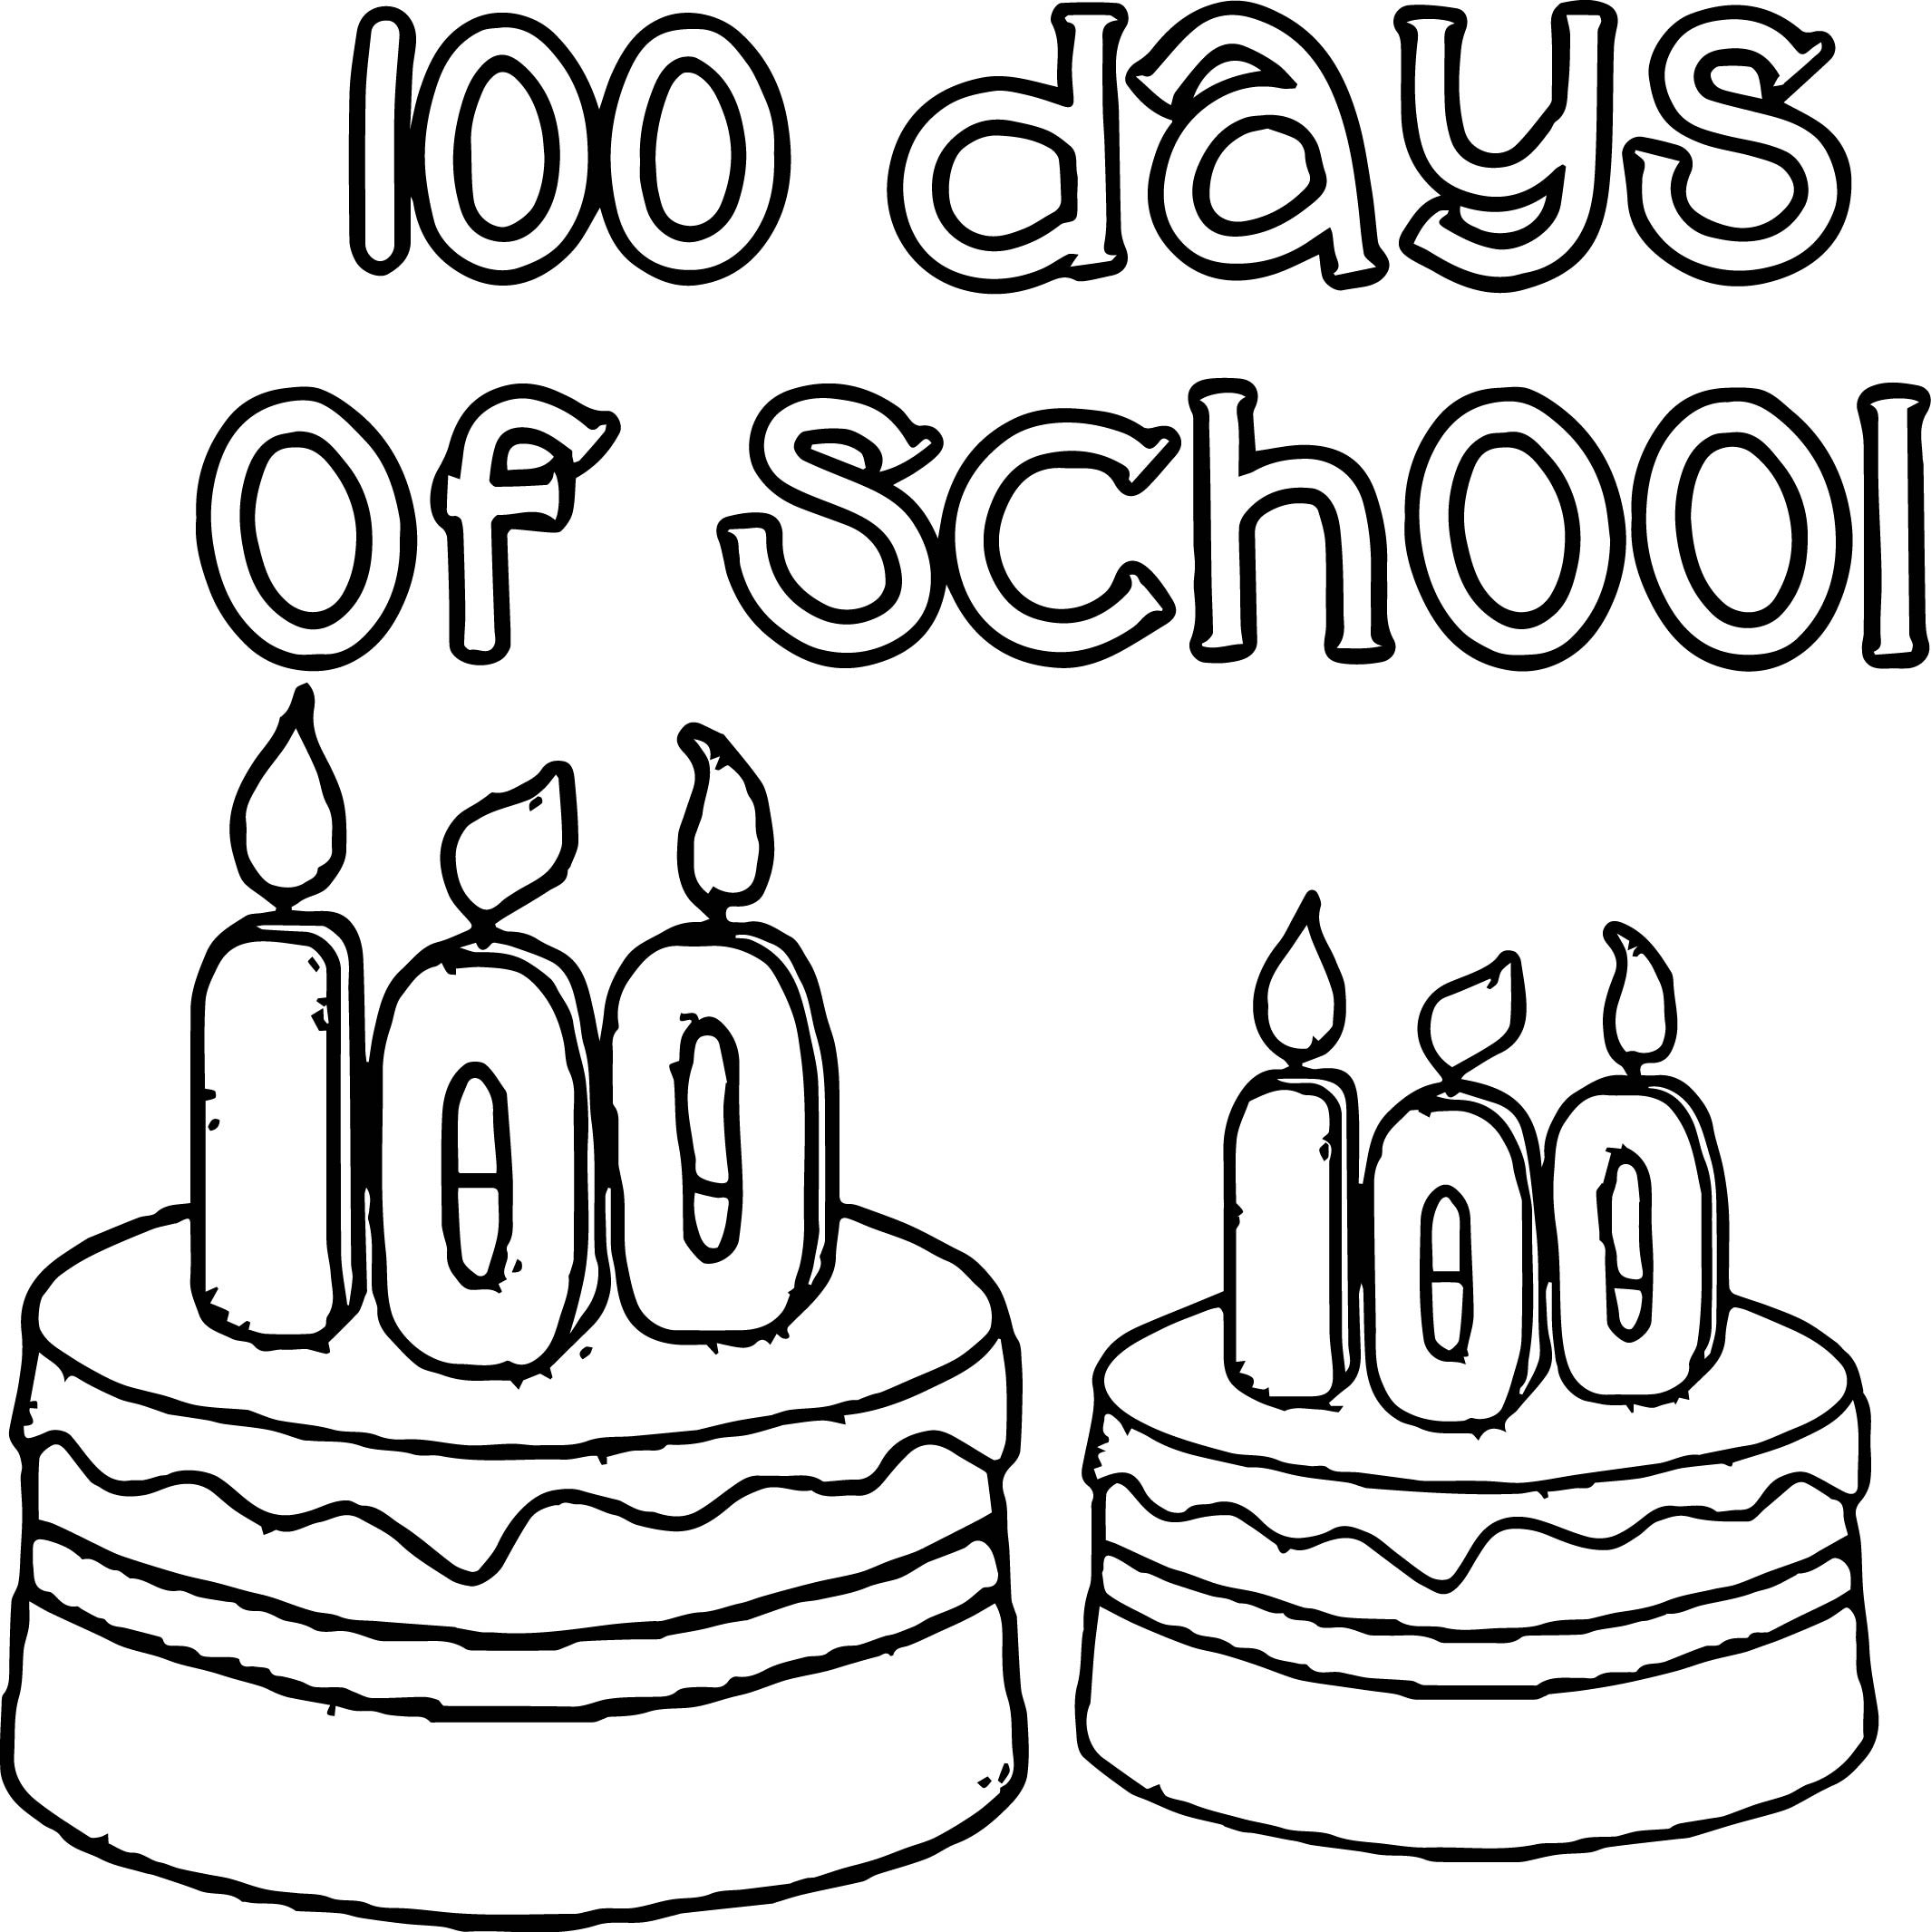 100 Days Coloring Pages
 100 Days School Birthday Coloring Page